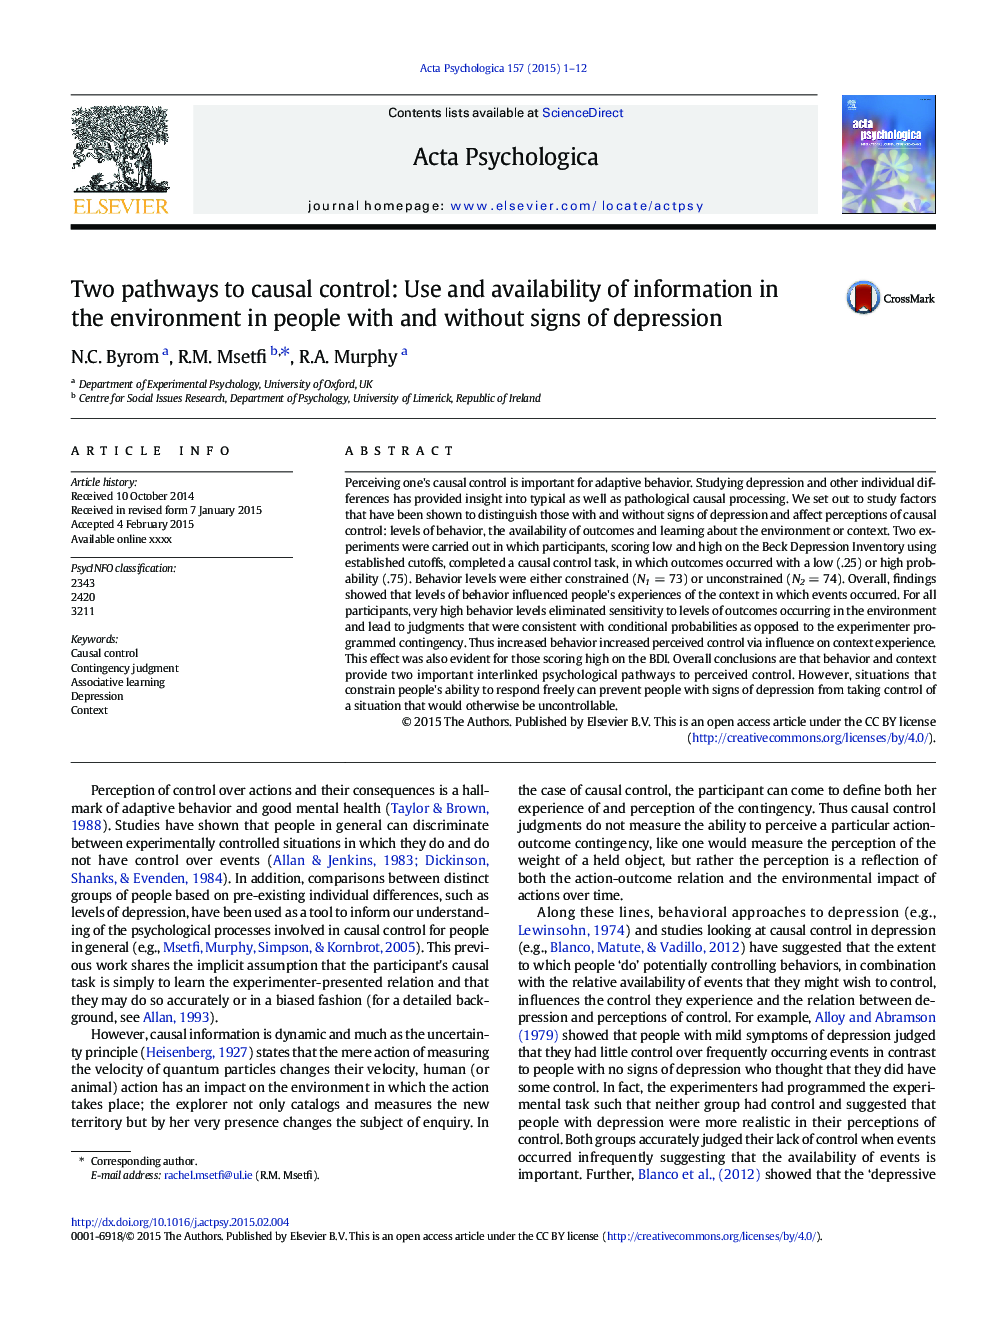 Two pathways to causal control: Use and availability of information in the environment in people with and without signs of depression